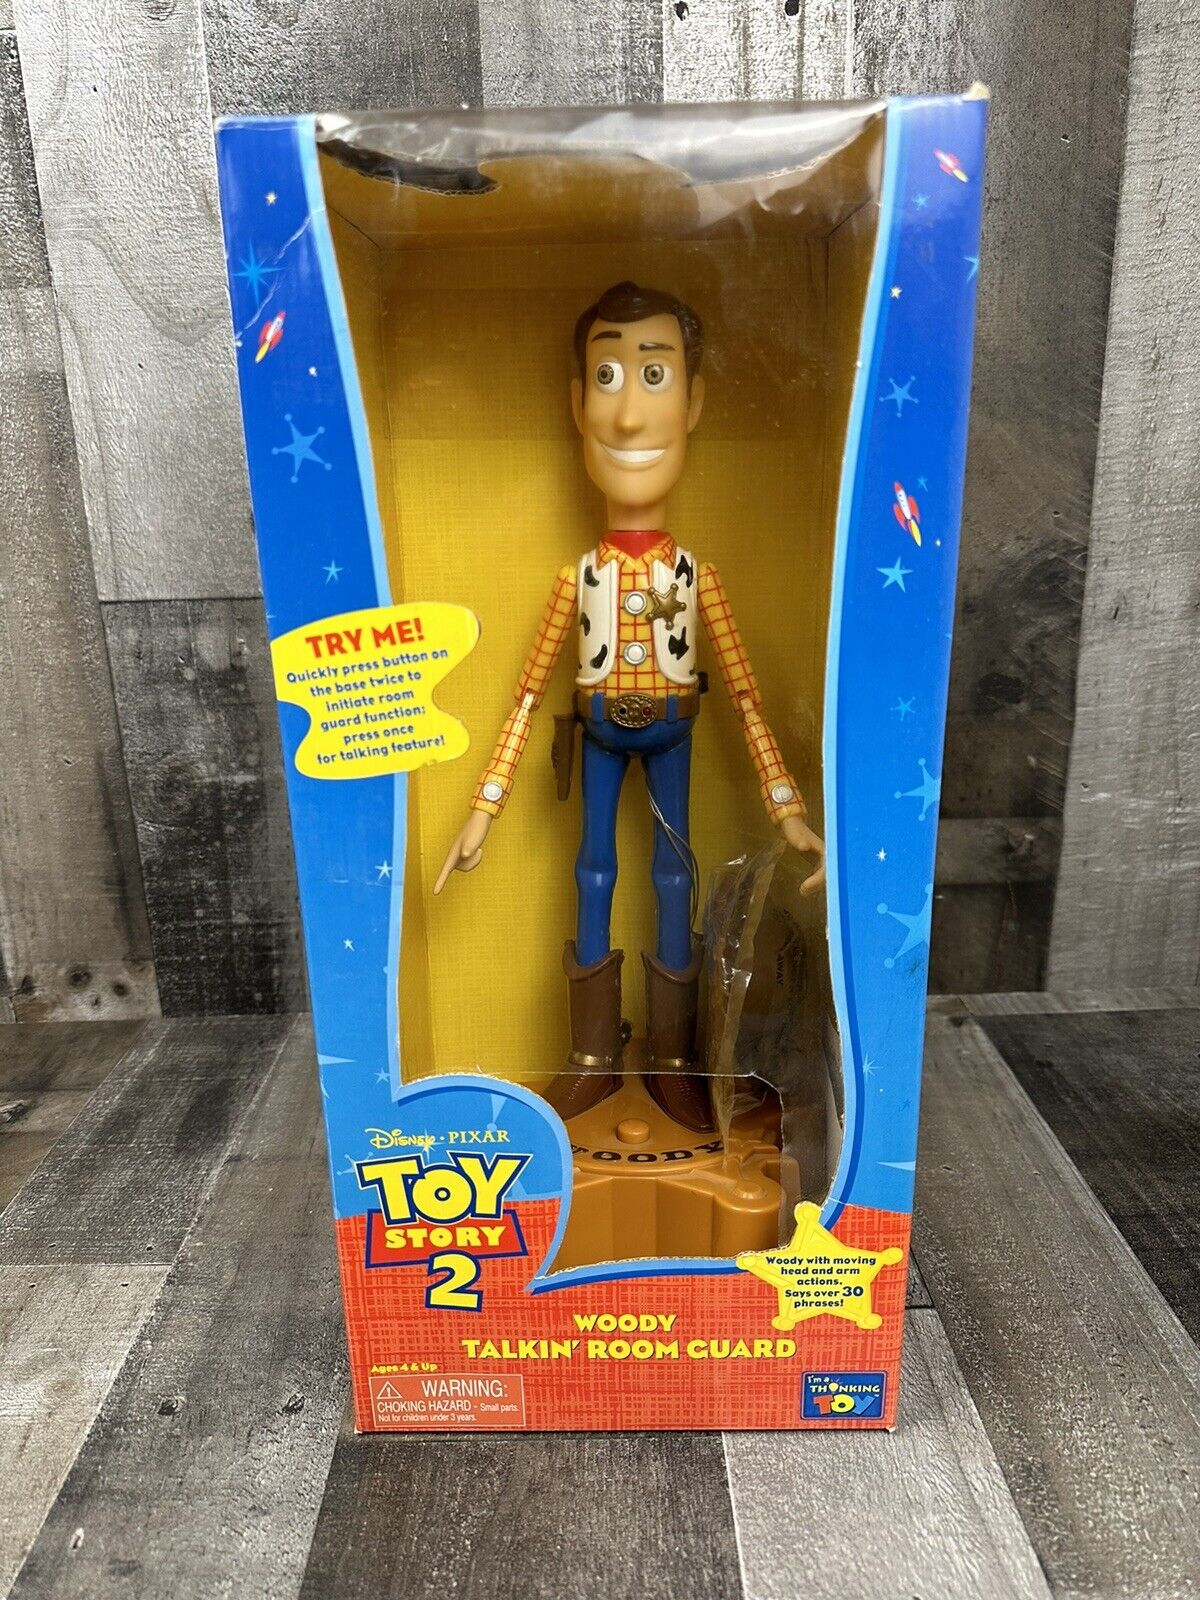 Toy Story 2 Woody Talk in’ Room Guard. 40cm Tall .